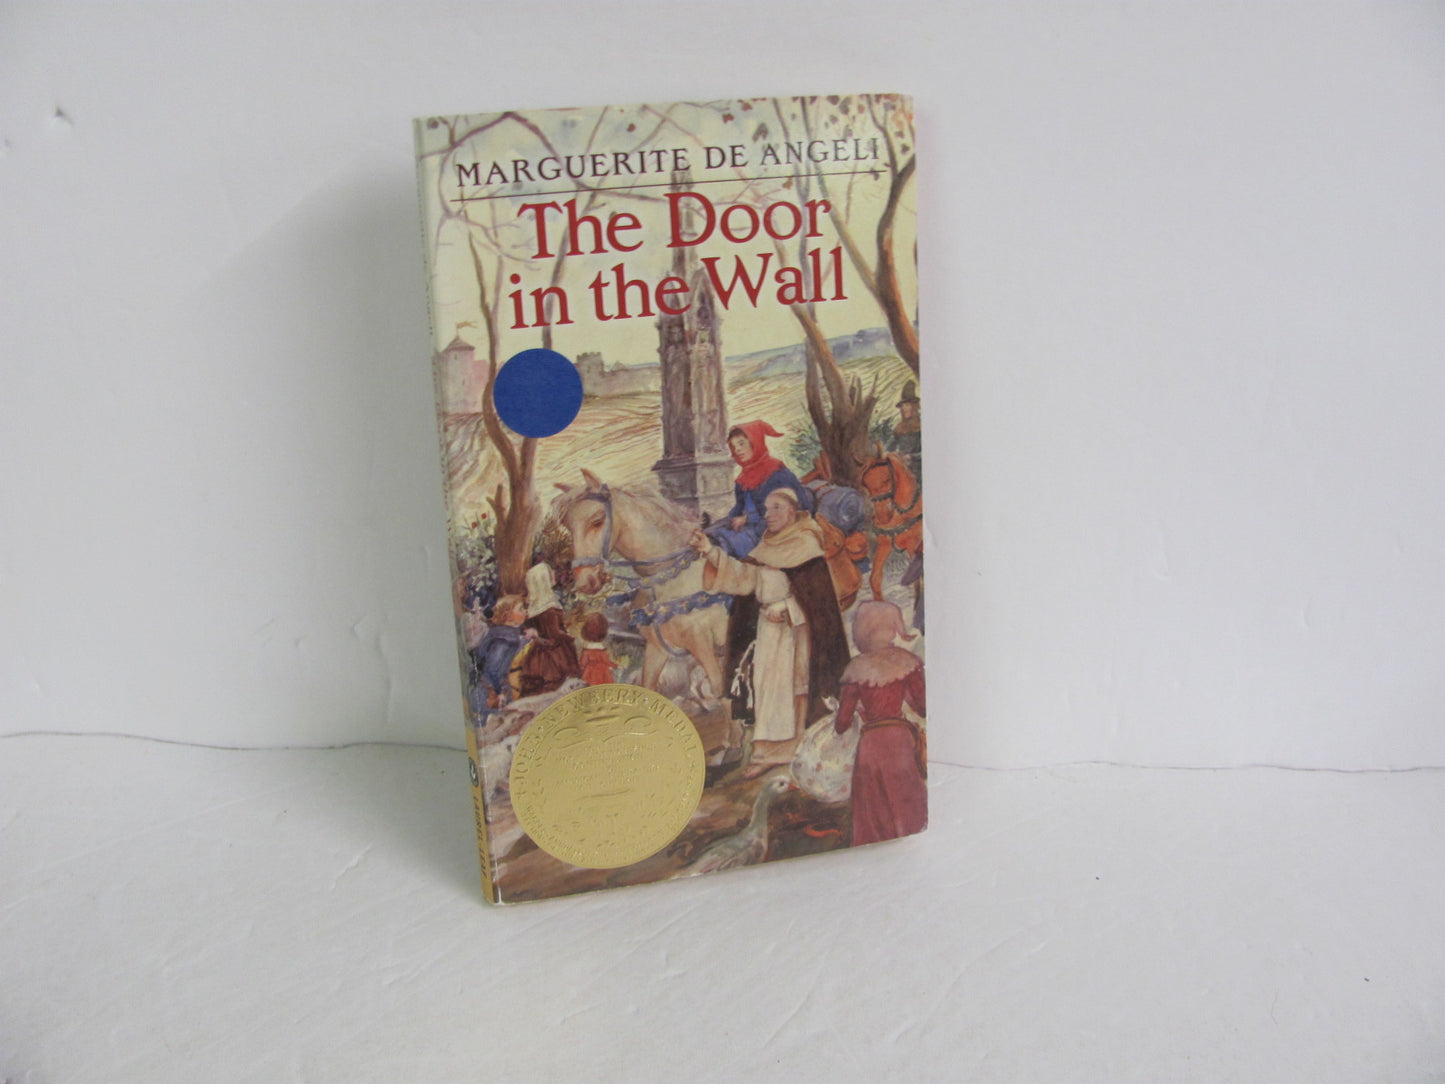 The Door in the Wall Laurel Leaf Pre-Owned de Angeli Fiction Books